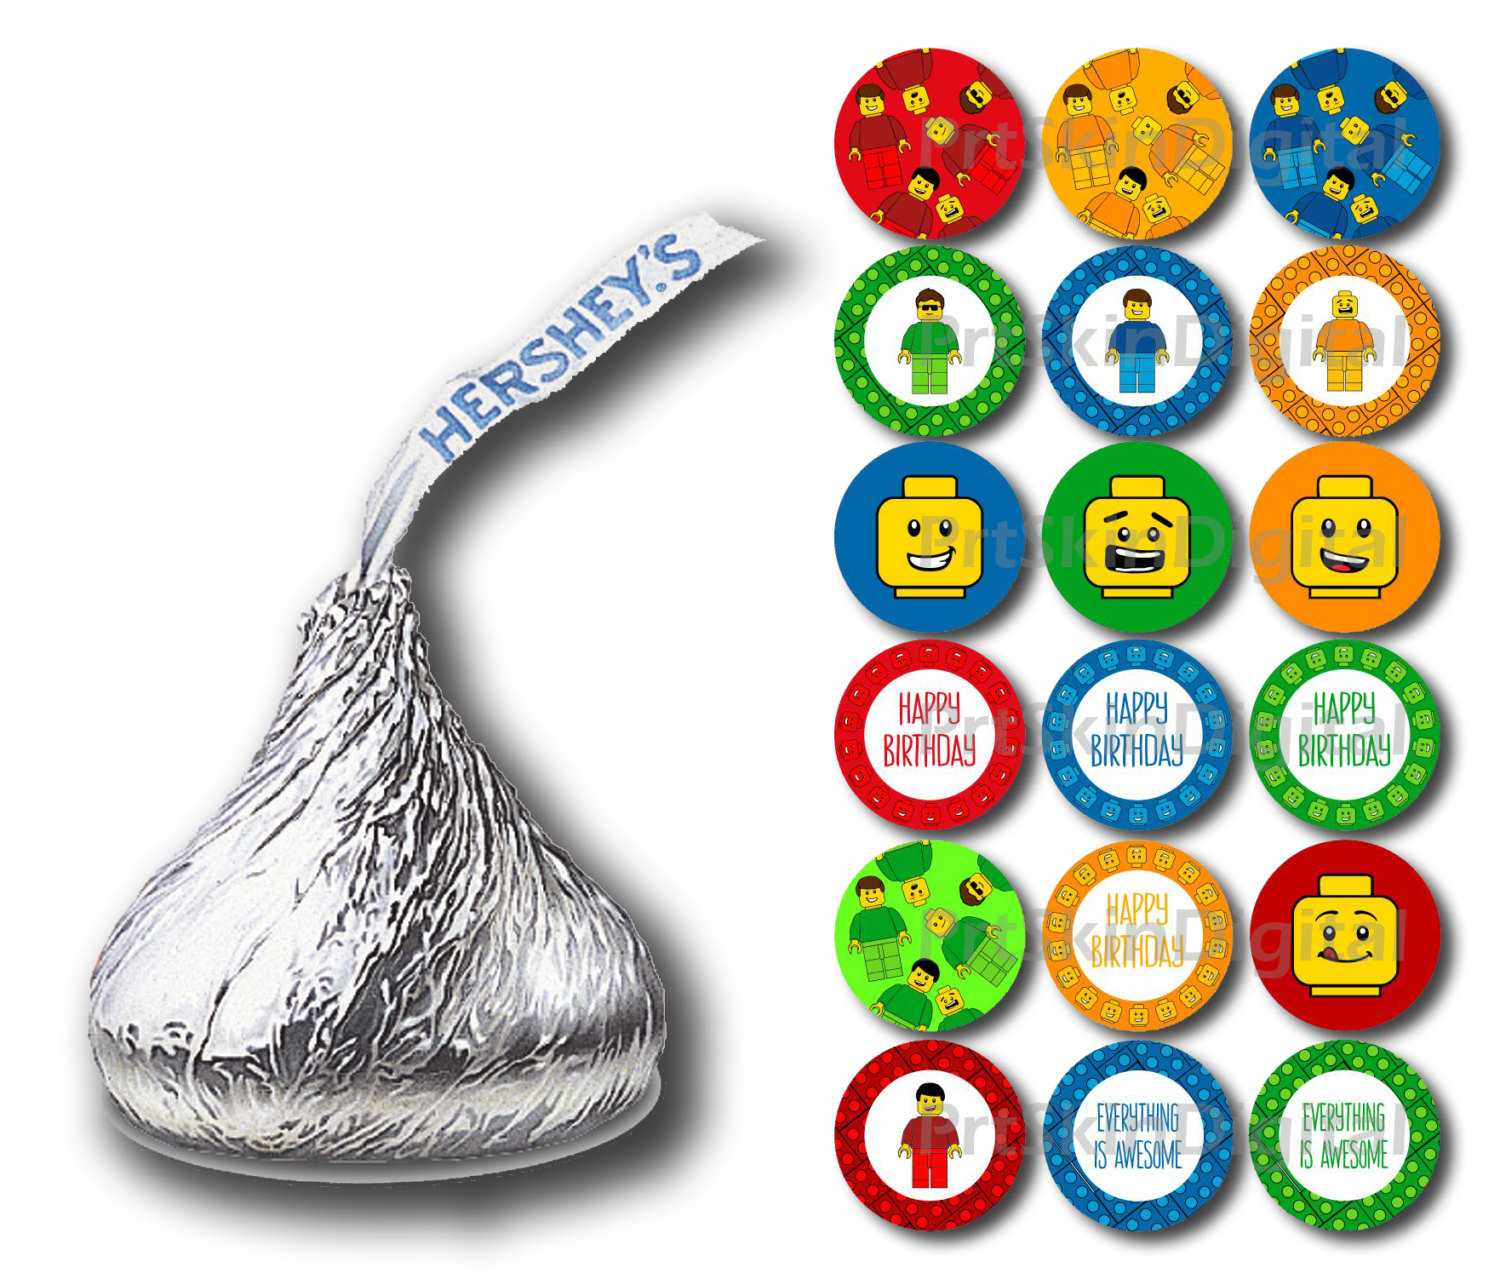 Free Hershey Kisses Labels Template ] – Labels Hershey Kiss Intended For Free Hershey Kisses Labels Template